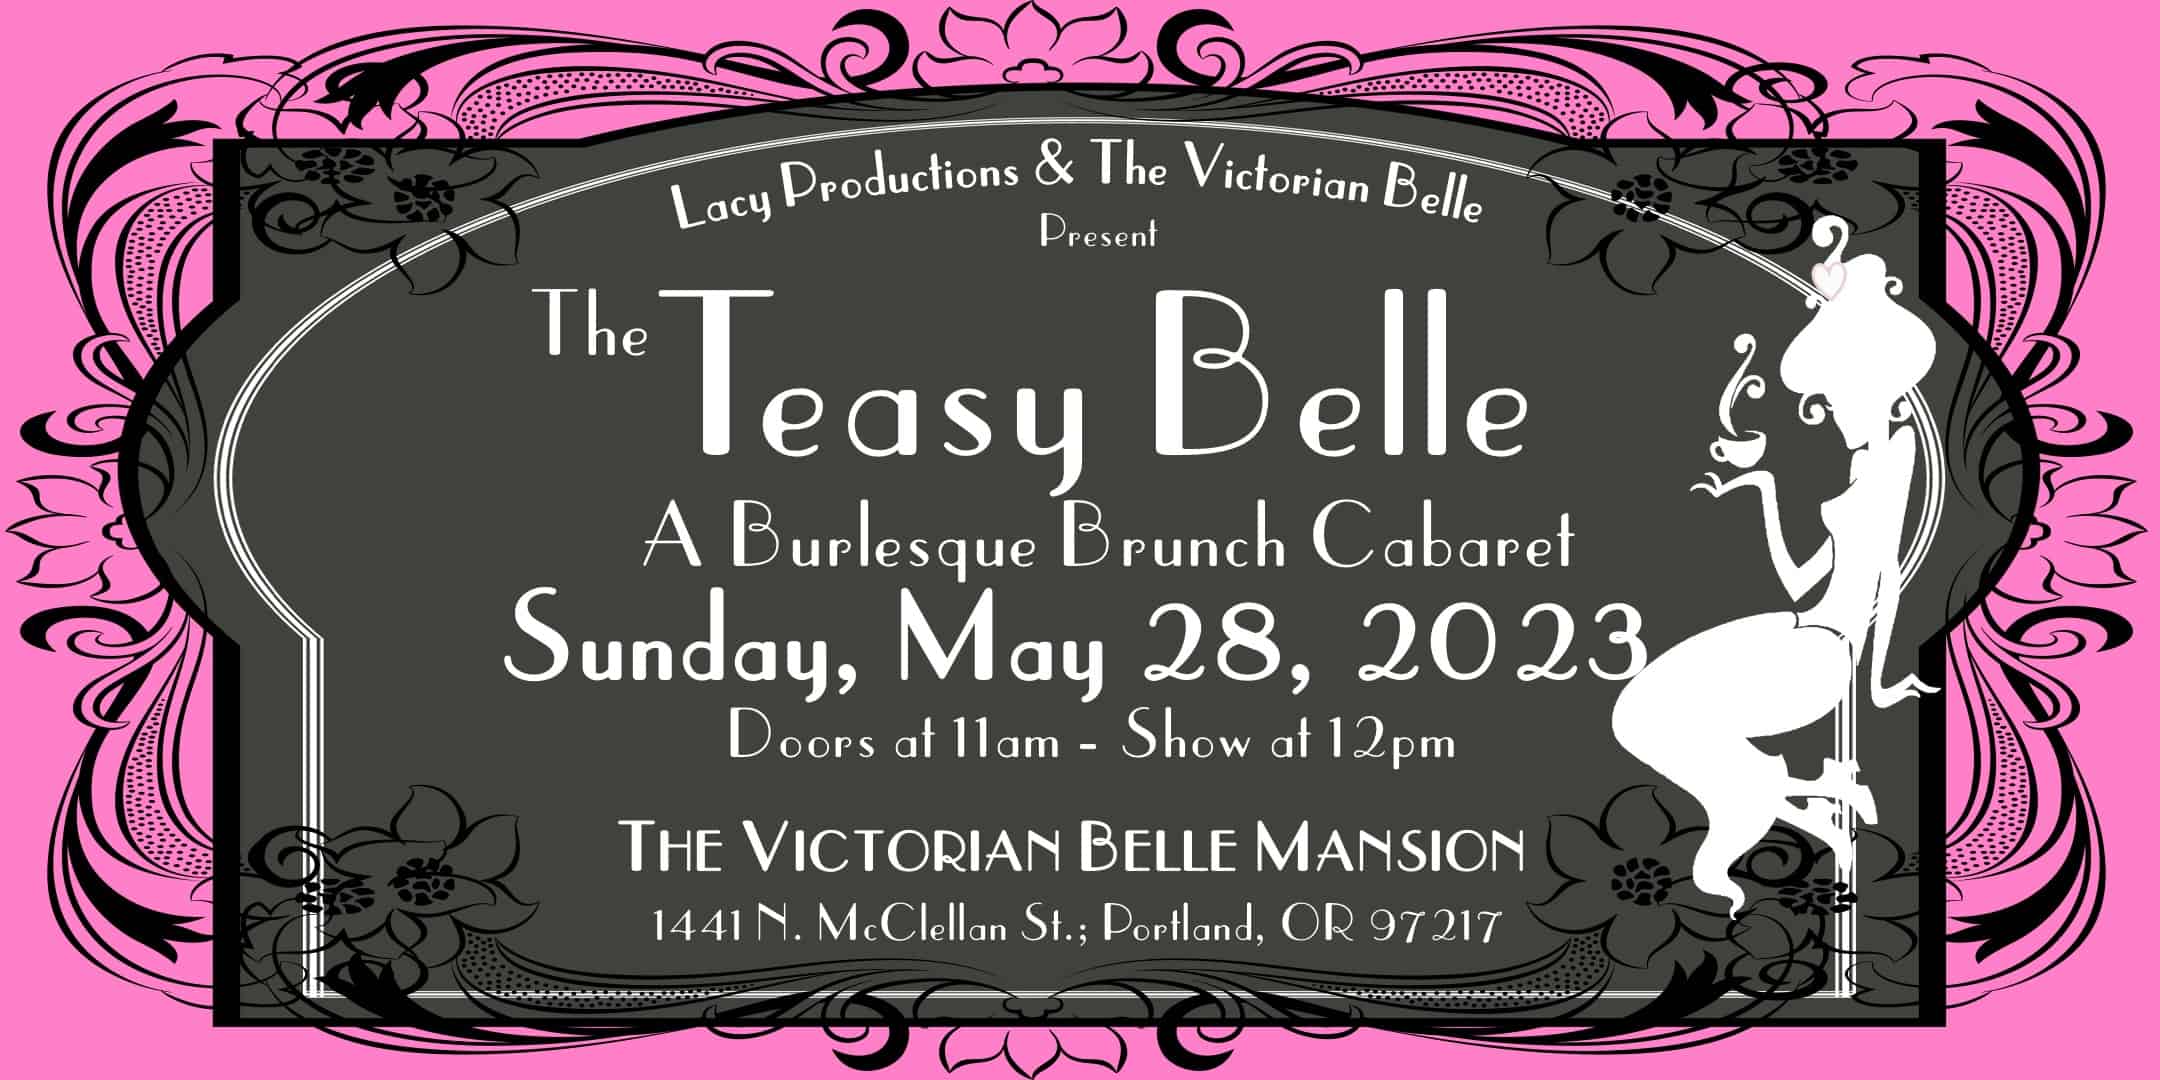 The Teasy Belle: A Burlesque Brunch Cabaret. Sunday, May 28th, 2023. Doors at 11:00 AM. Show at 12:00 PM